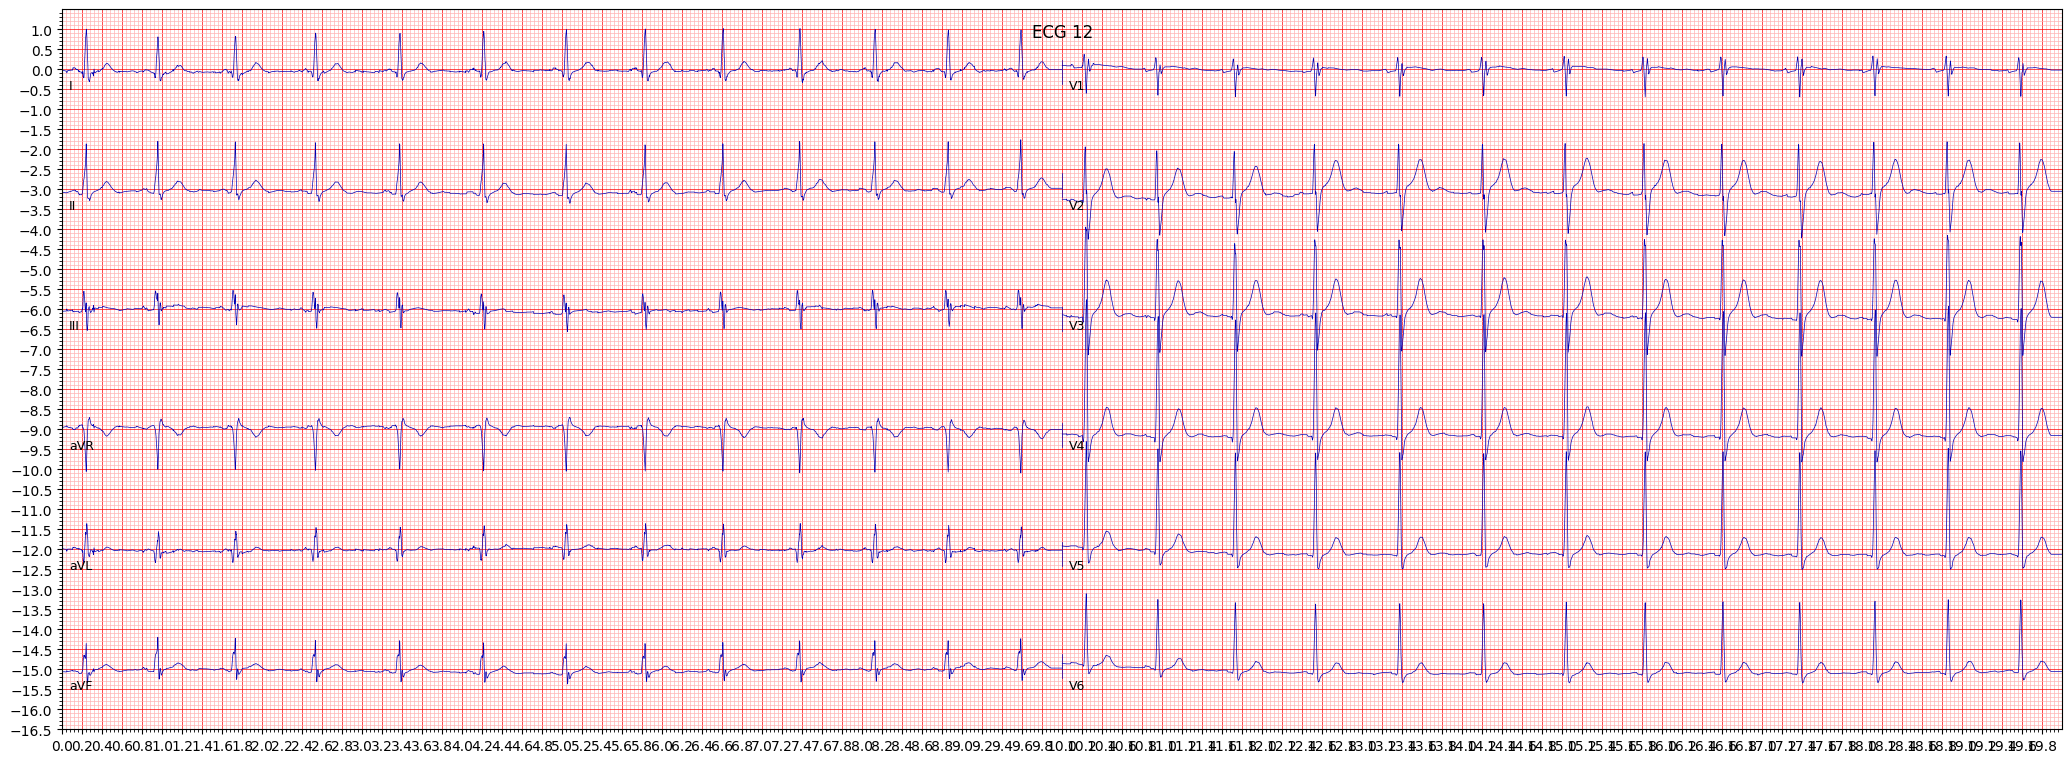 incomplete right bundle branch block (IRBBB) example 52